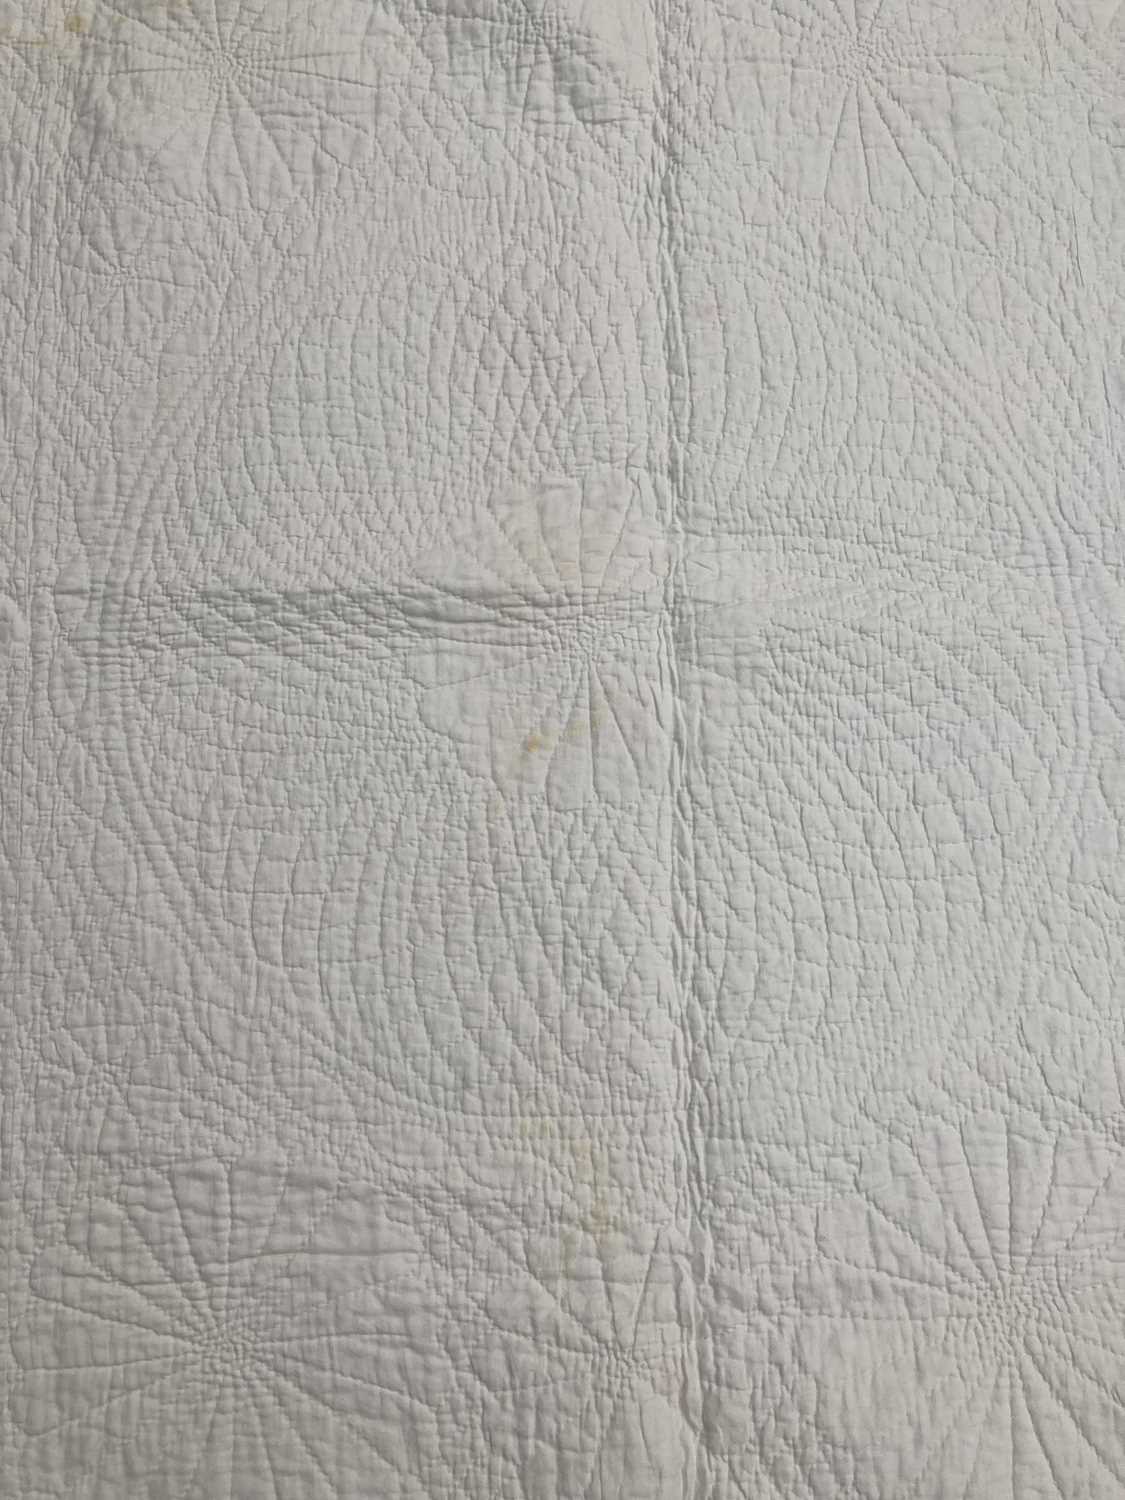 Late 19th Century White Cotton Whole Cloth Quilt, hand quilted with a central circle, flanked by - Image 8 of 9